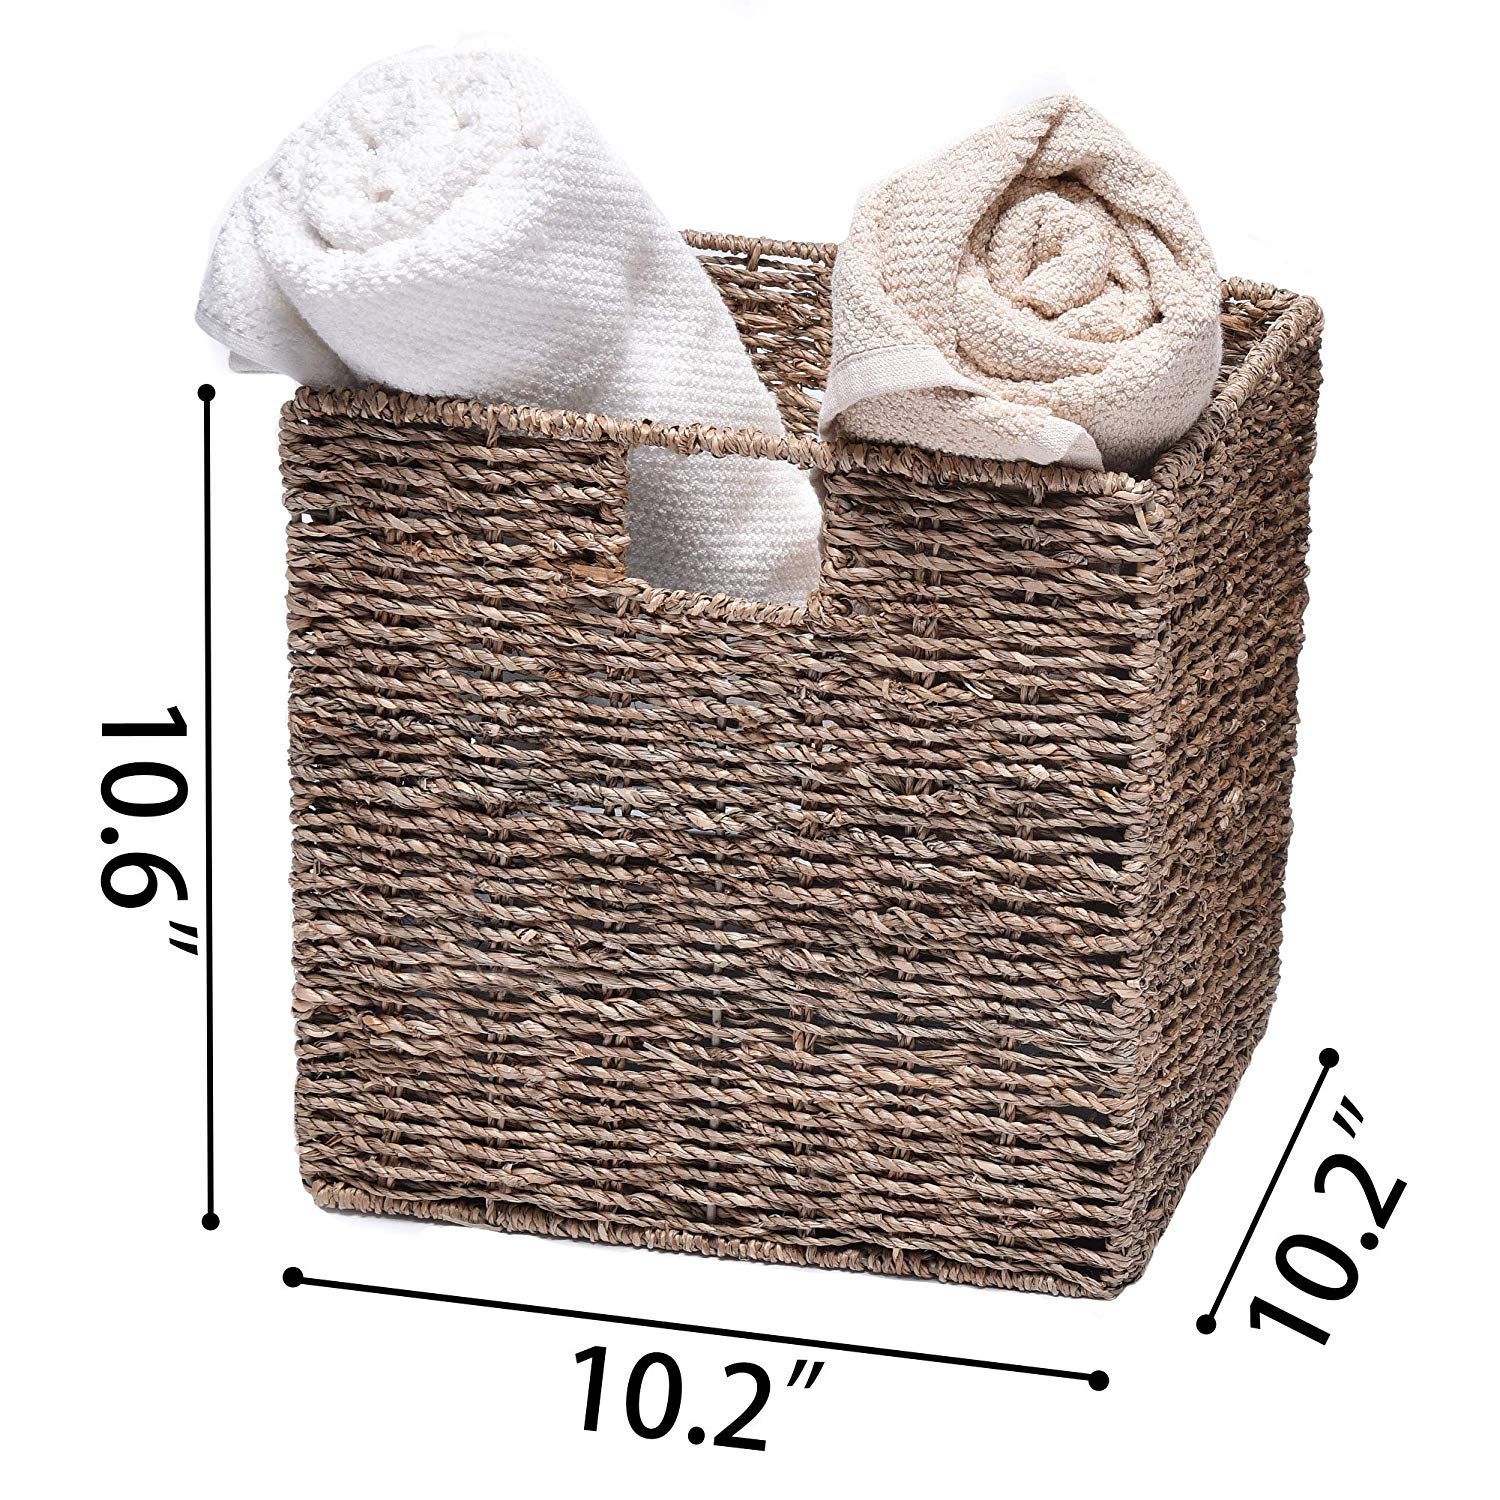 Rectangular Hand-Woven Seagrass Baskets with Linings, 2-pack